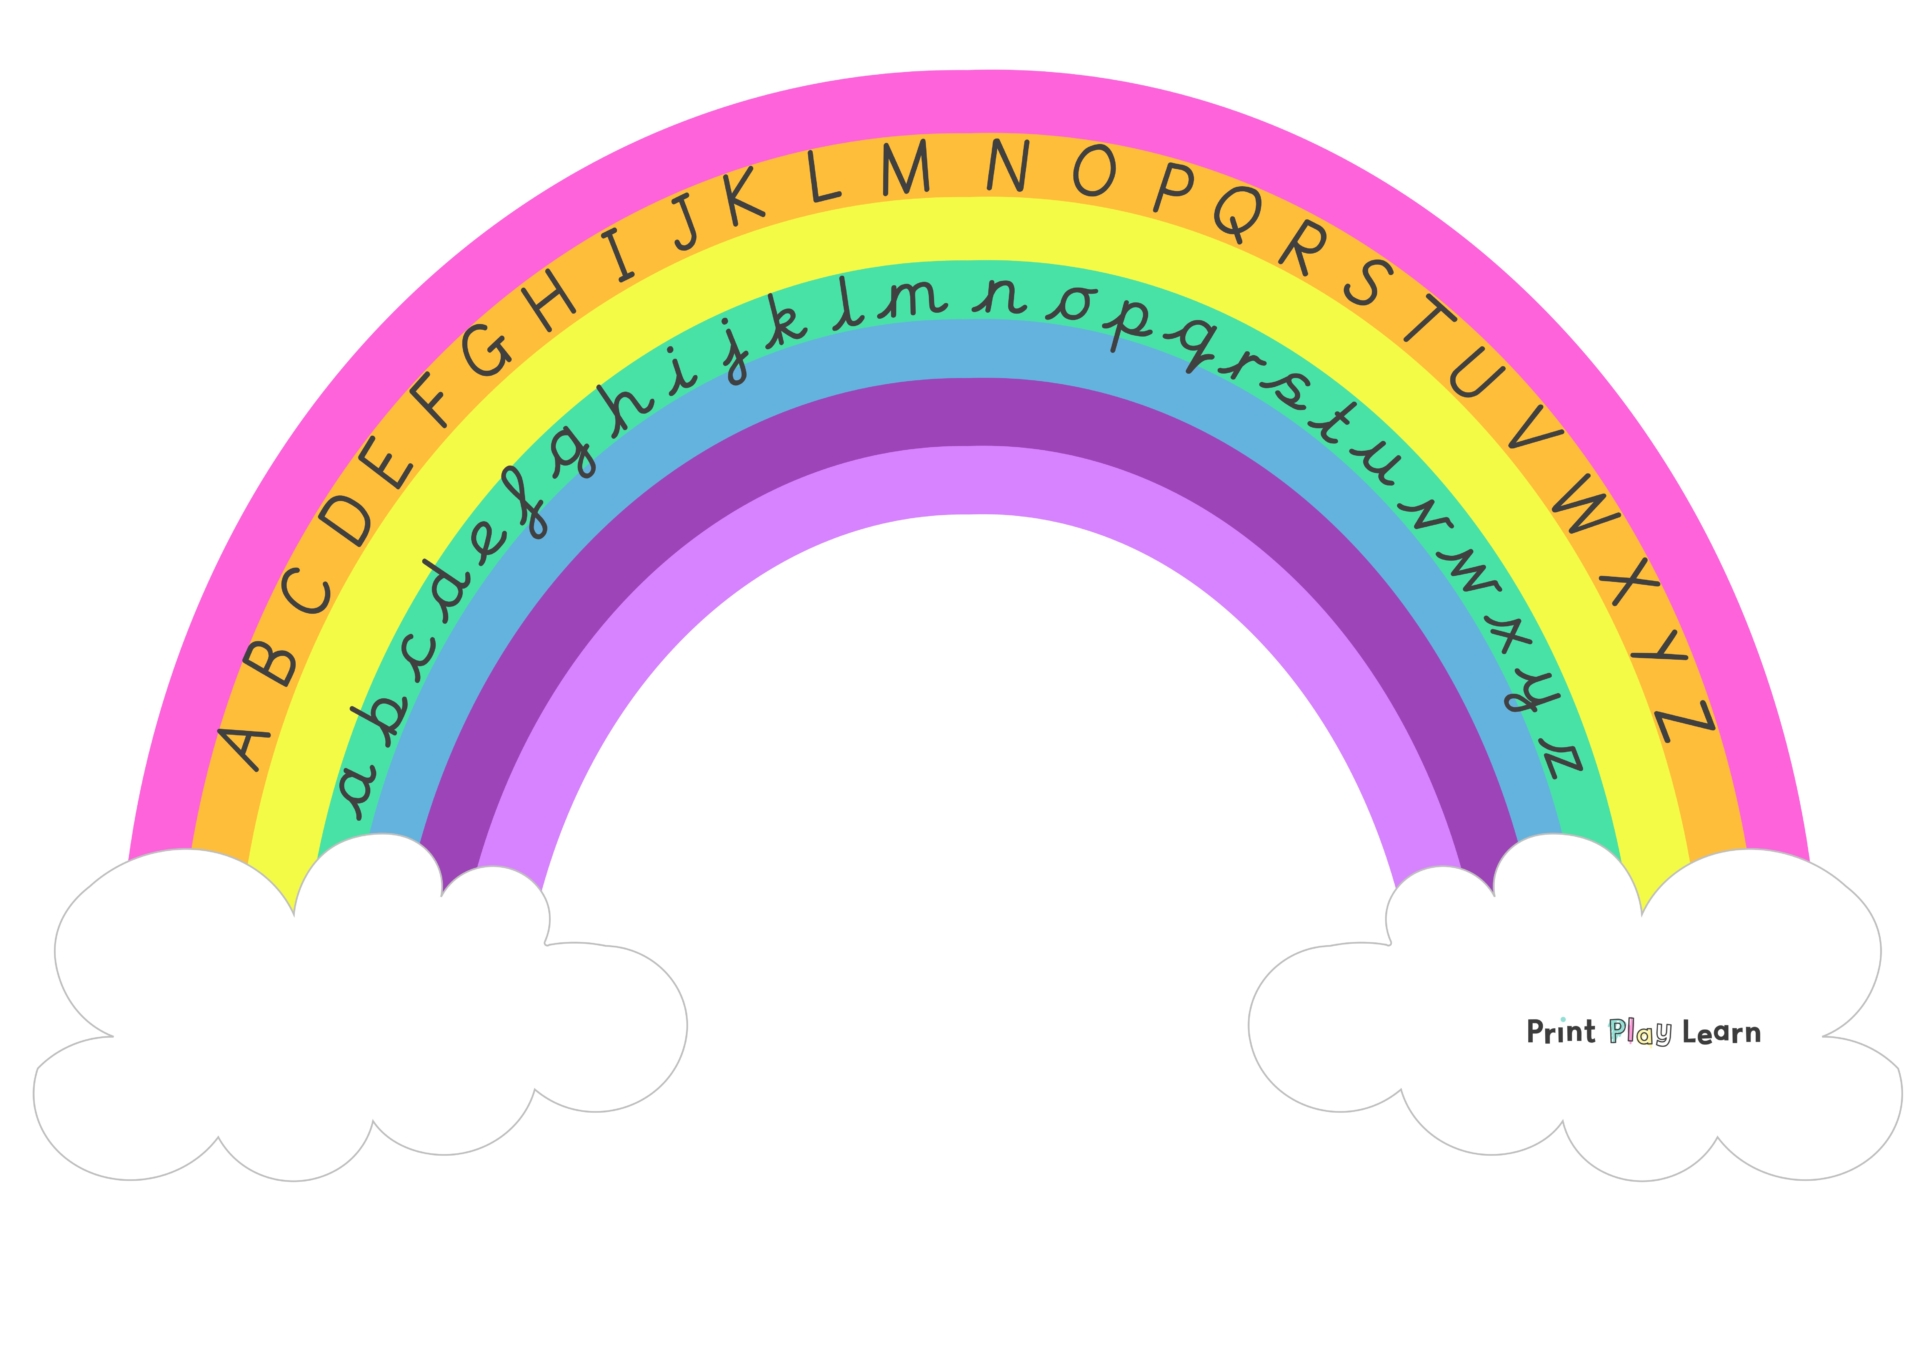 Alphabet Arc / How quickly can you say the name of each letter